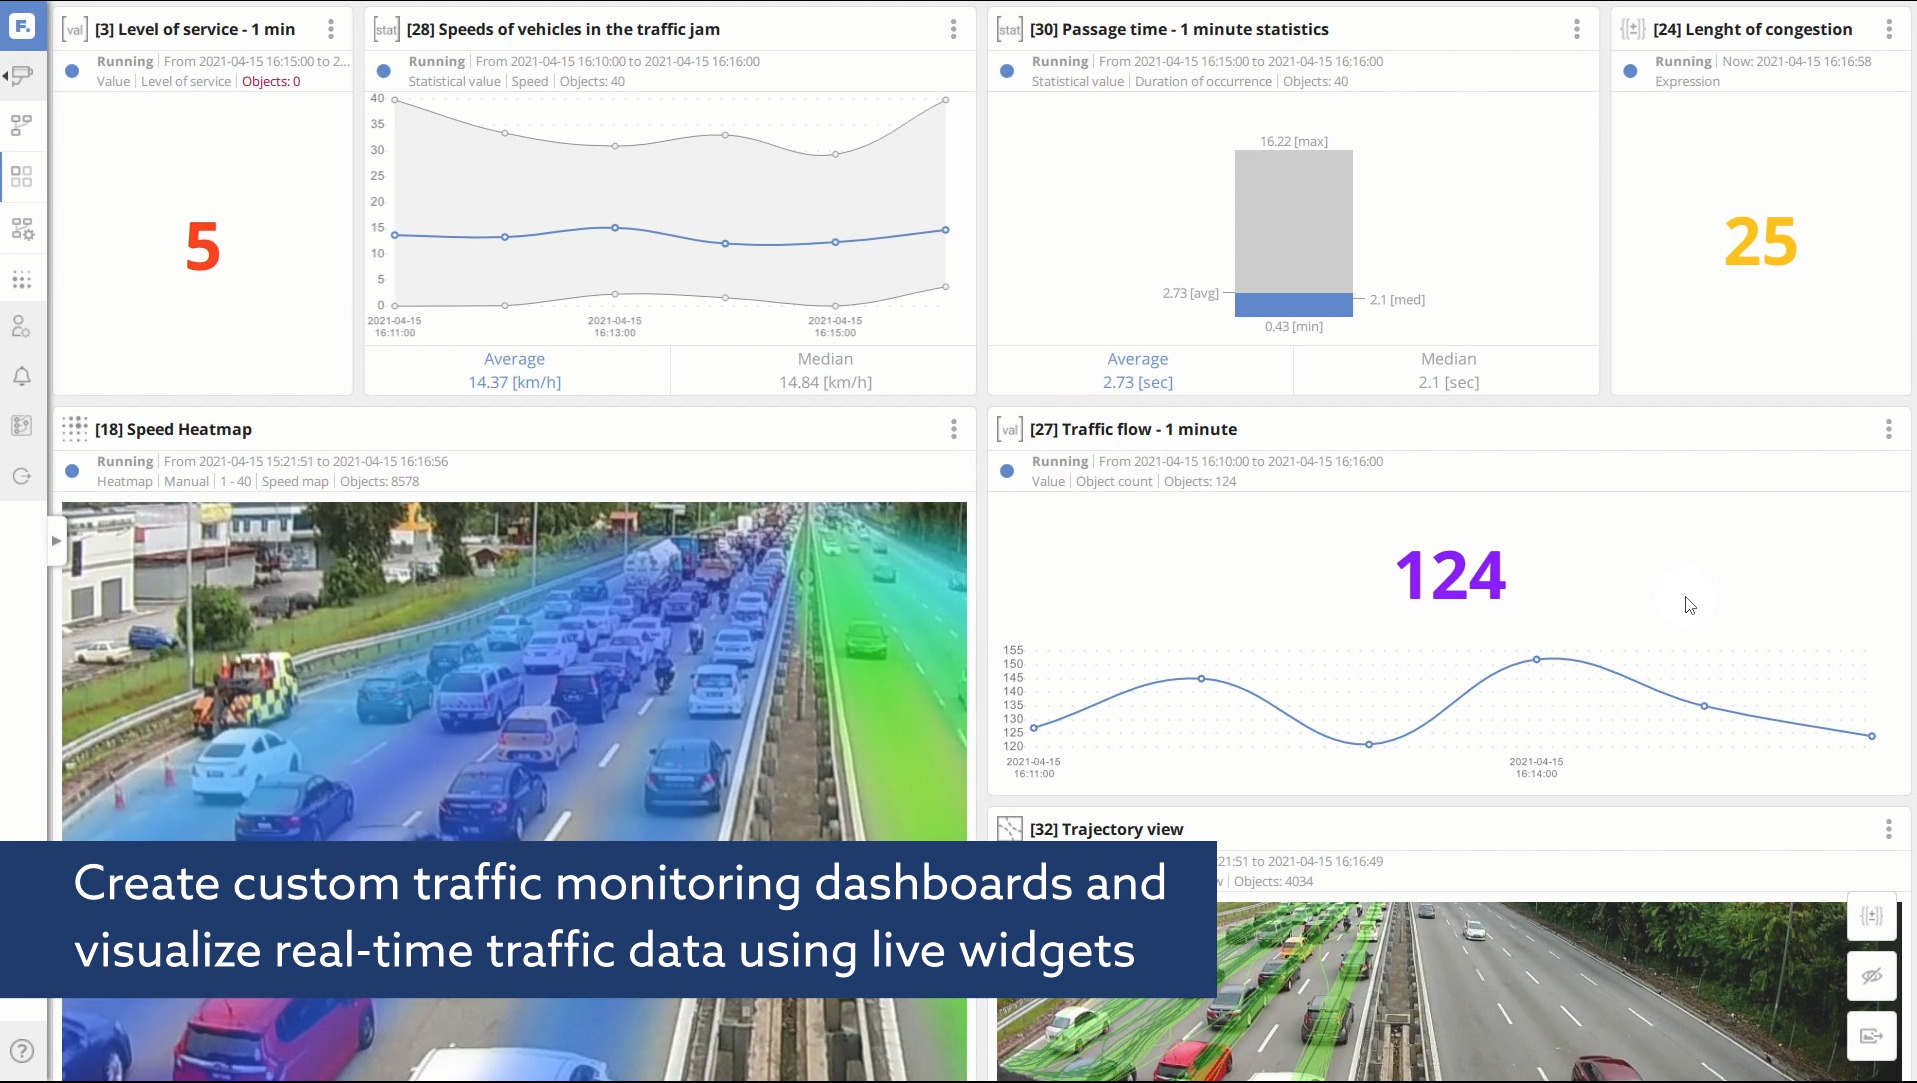 Live Widget Dashboards For Traffic Data Visualizations And Monitoring